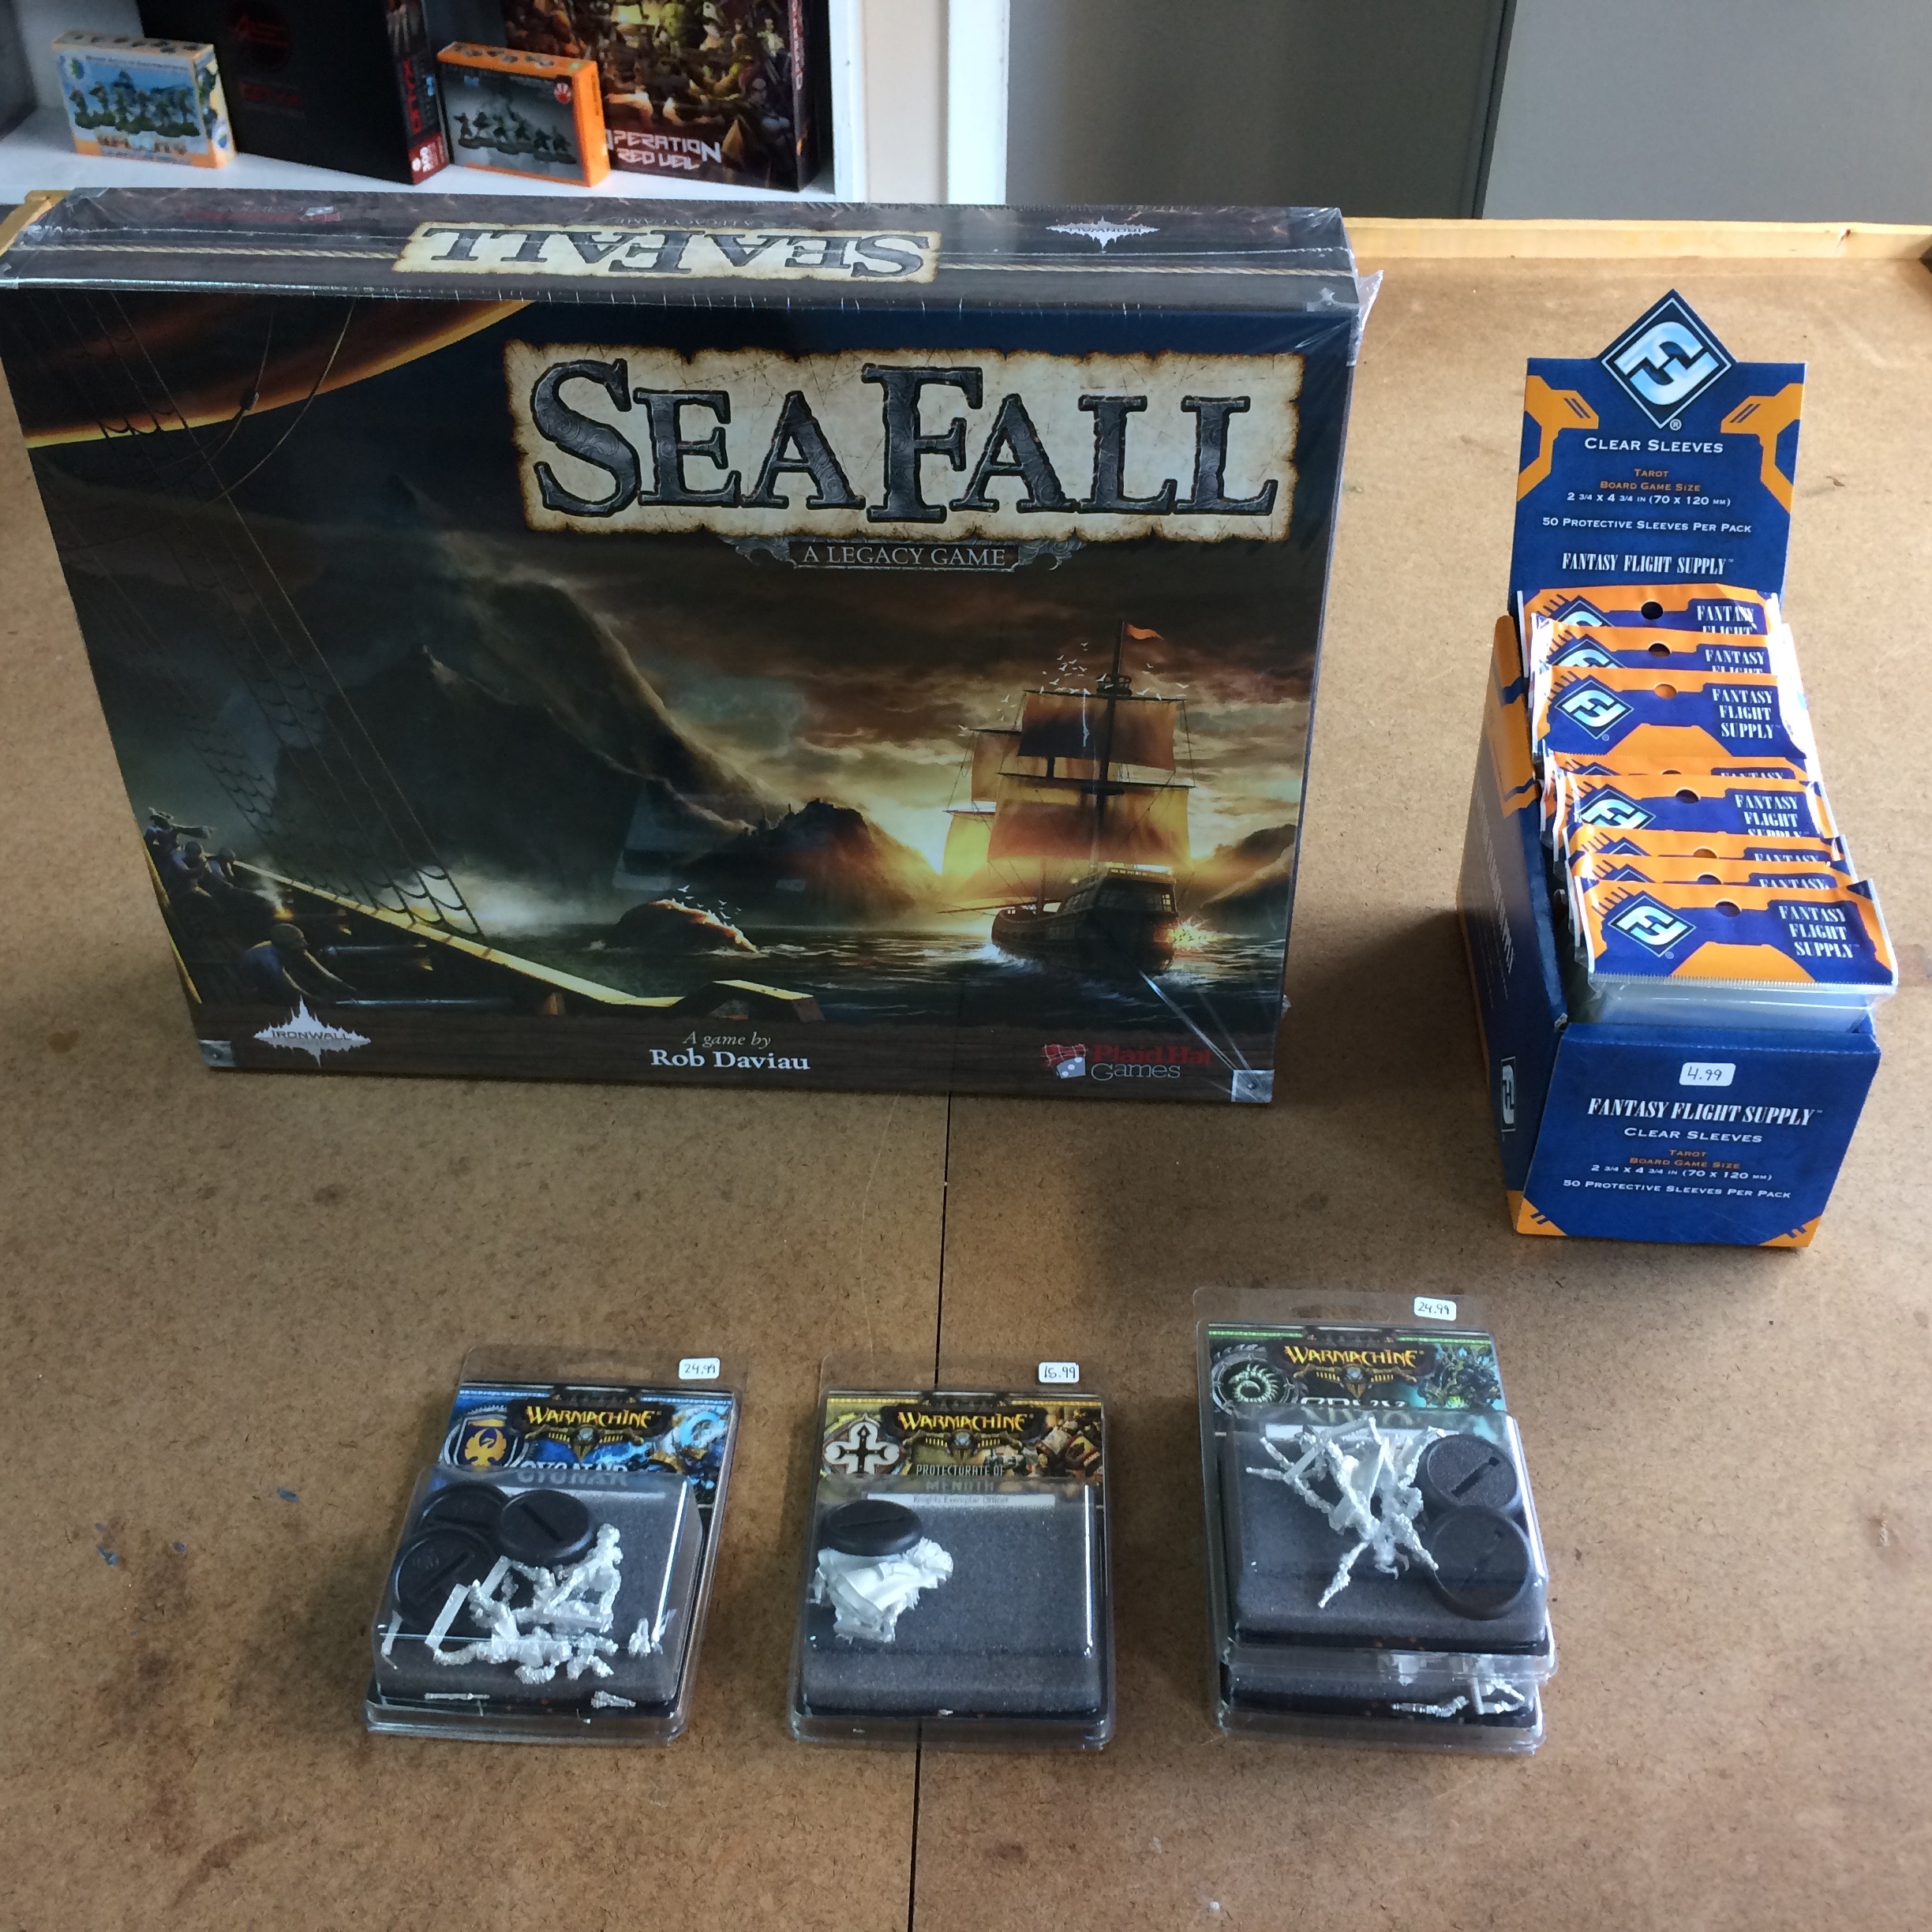 SeaFall, Warmachine, and Ogors!